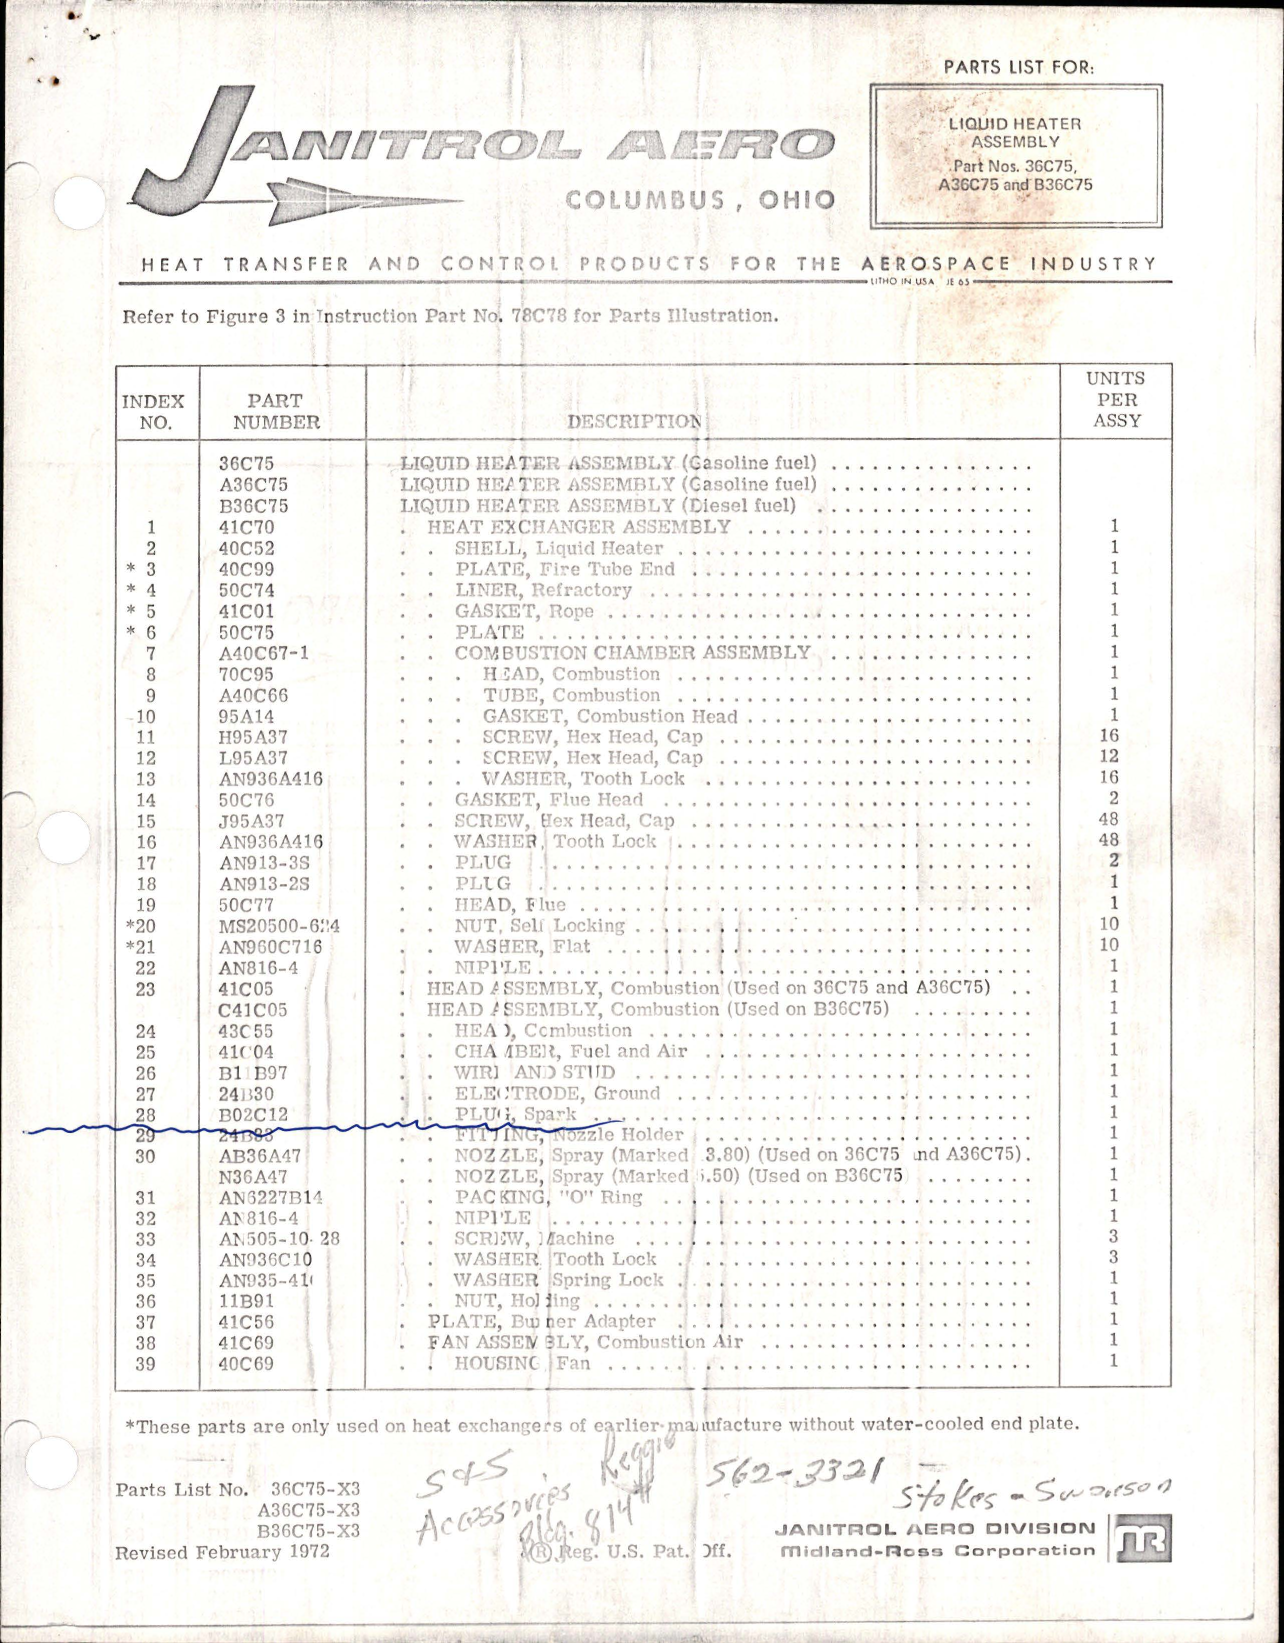 Sample page 1 from AirCorps Library document: Parts List for Liquid Heater Assembly - Parts 36C75, A36C75, and B36C75